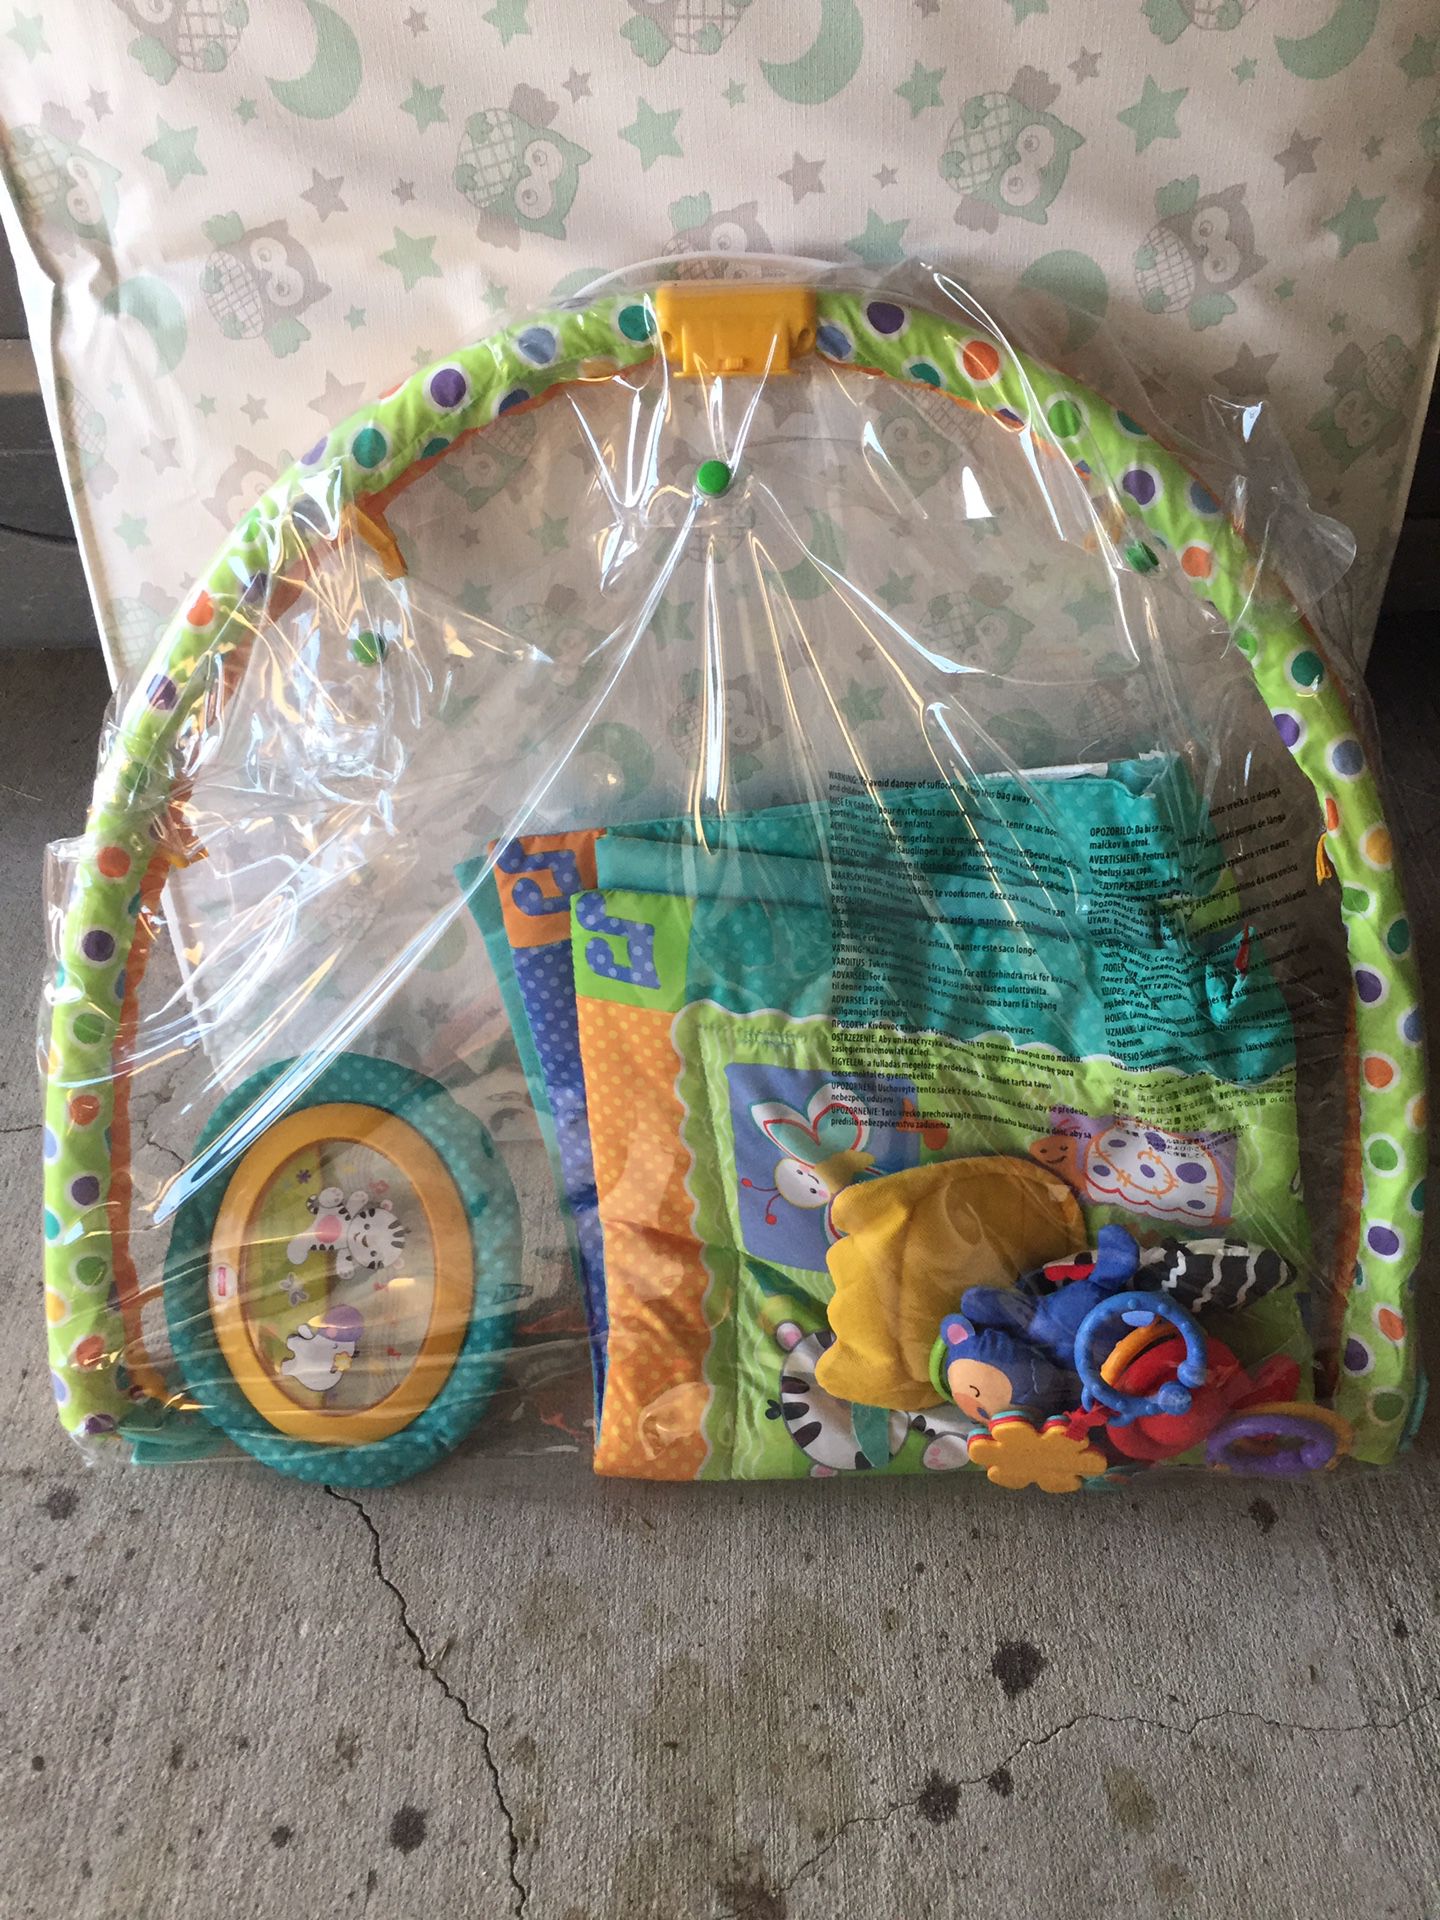 Baby Foldable Play Mat